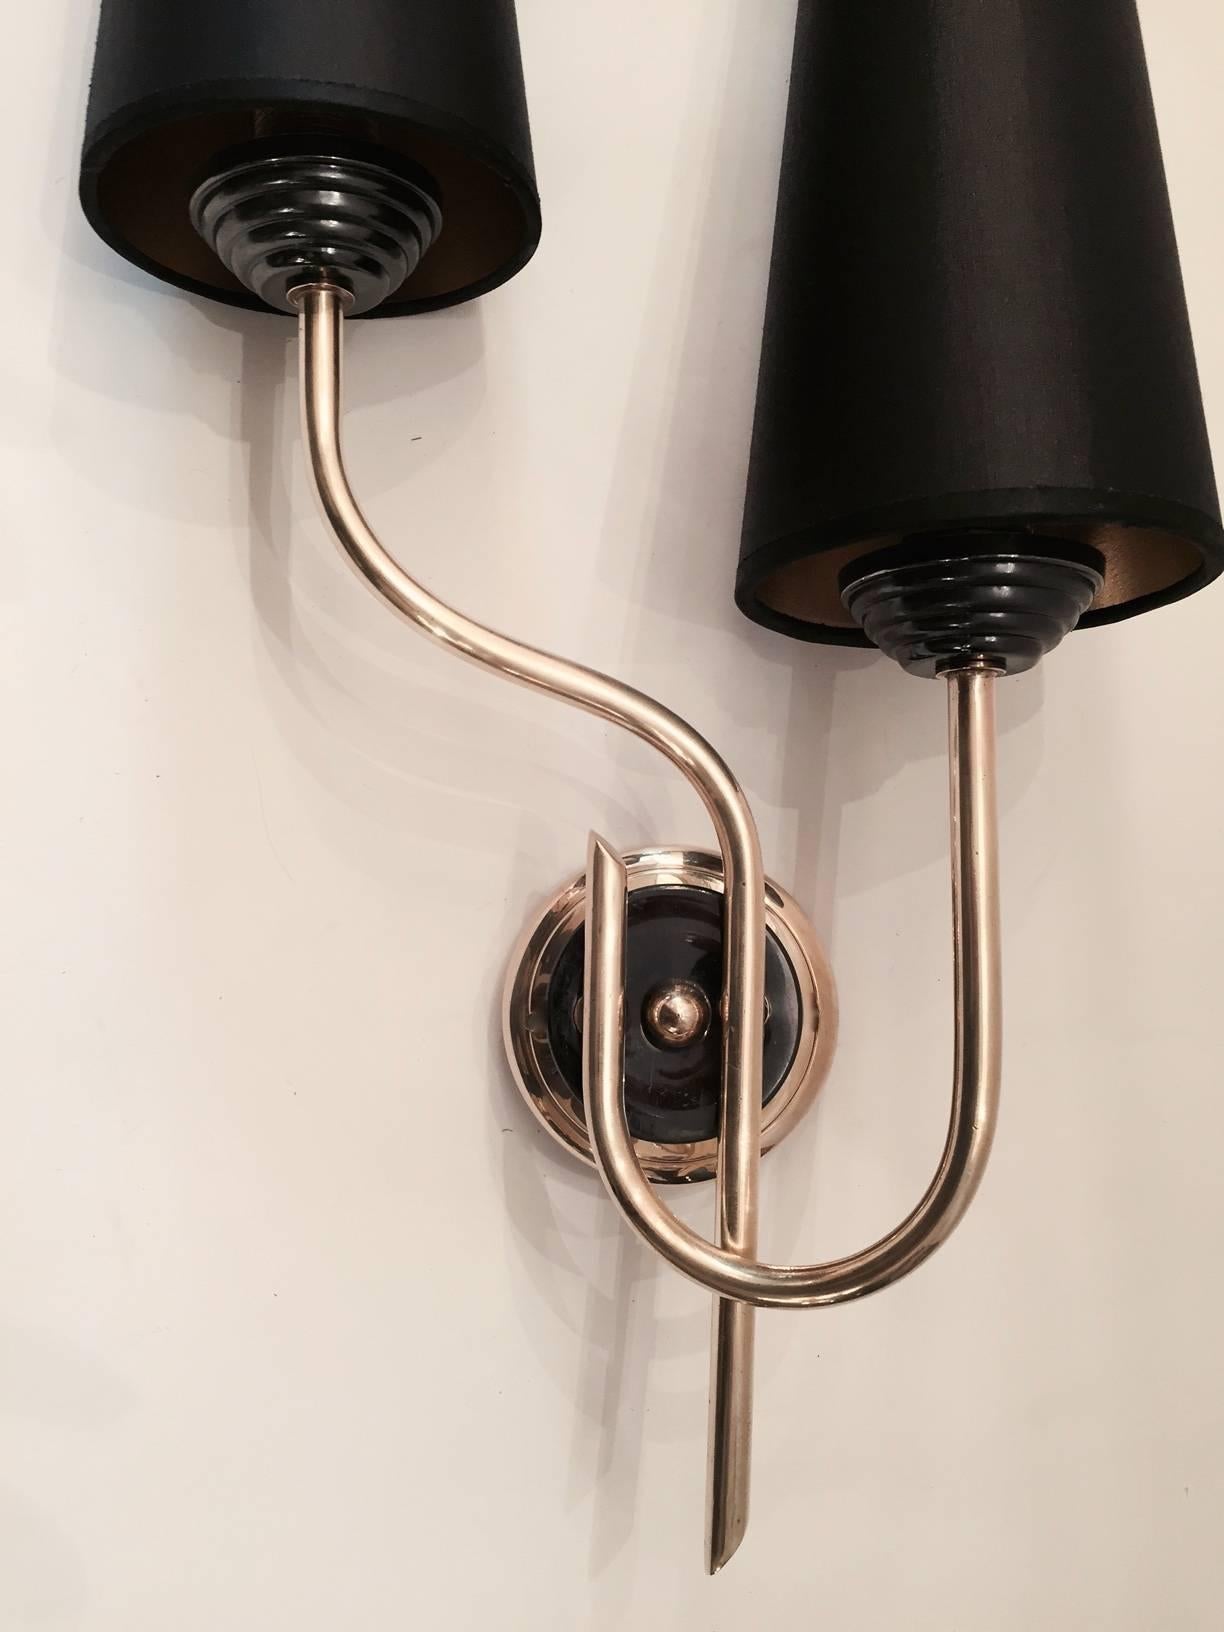 Pair of large 1950s asymmetrical sconces by Maison Lunel.
Composed of two nicely curved and departed gilt brass rods underlined with two gunmetal color brass cups on the base. They are surmounted by custom lampshades with gold color inside and